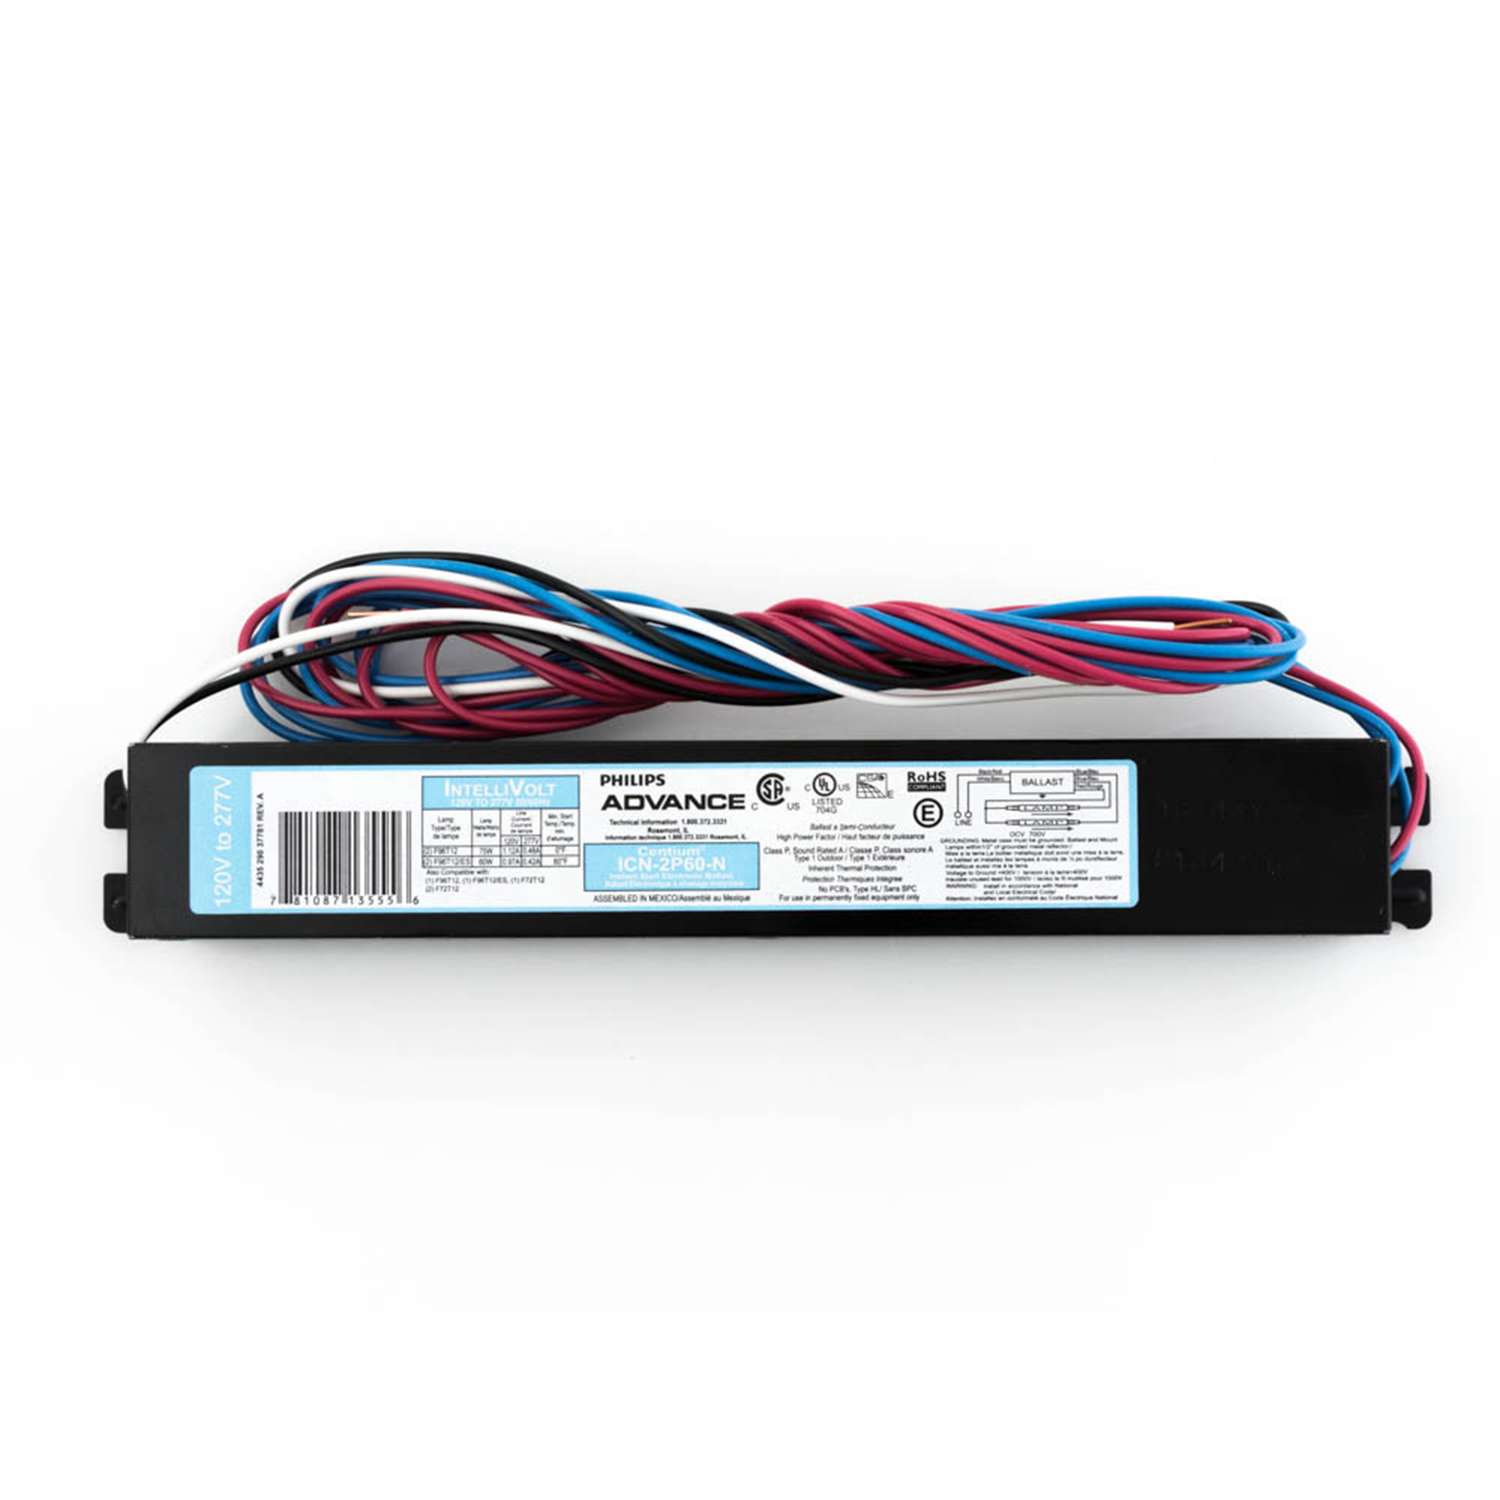 Philips Advance T12 Electronic Ballast 108662-1 Each for sale online 